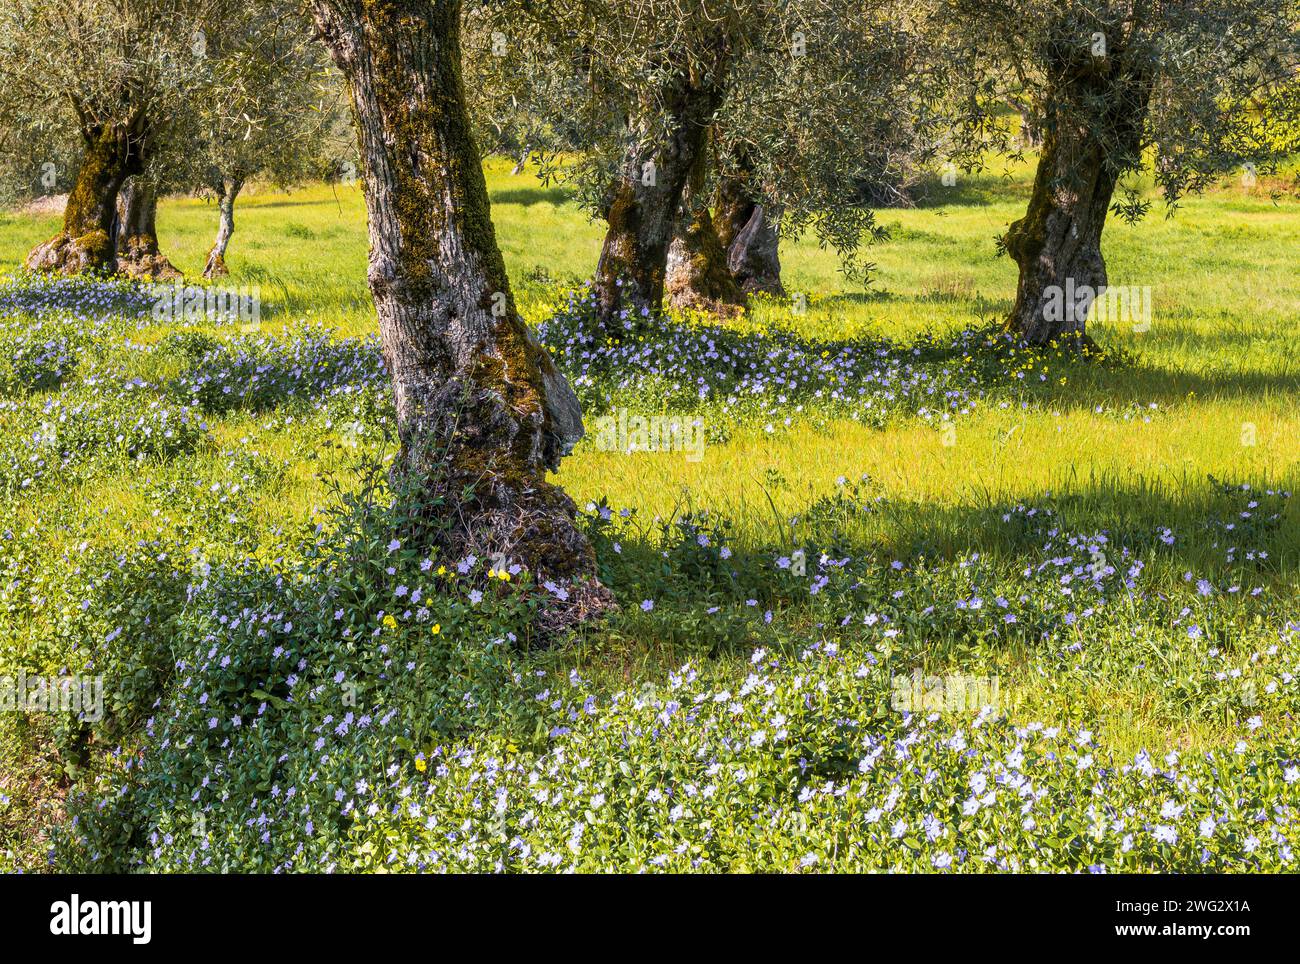 Wildflowers growing around the trees in an olive grove in Central Portugal Stock Photo